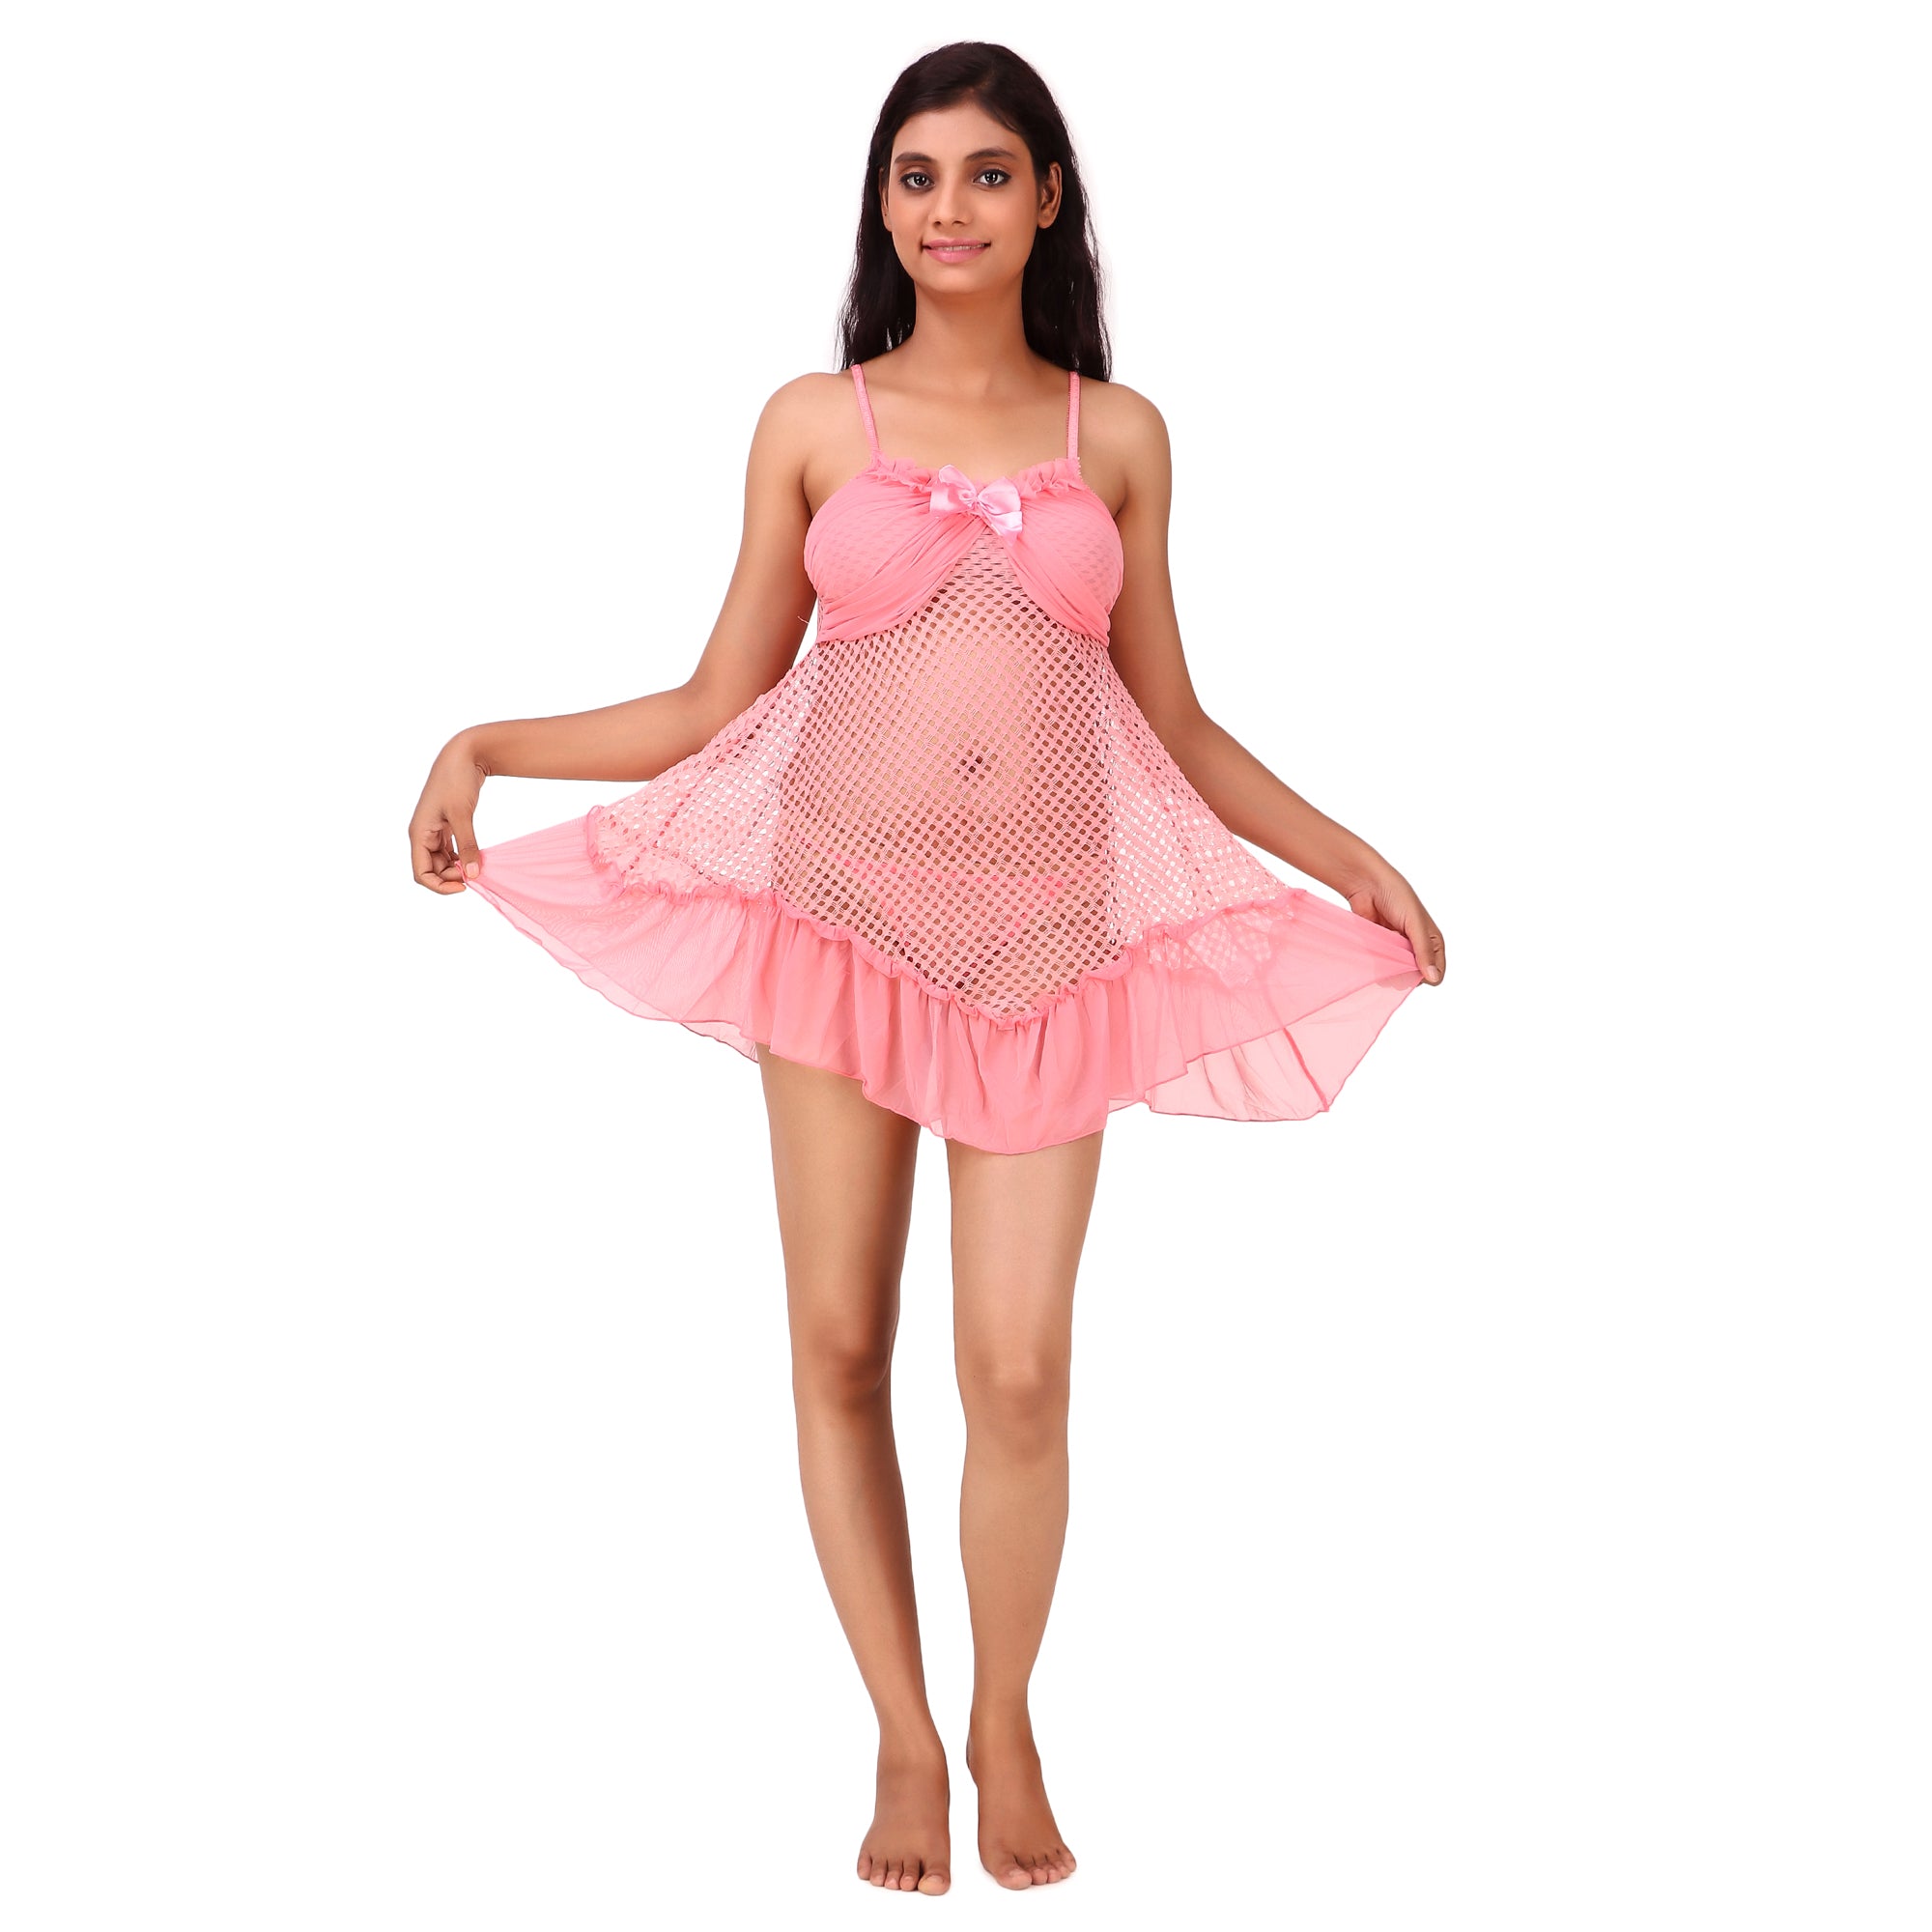 AXTZH-XNTS032 Lace Sheer Baby doll With Matching Thong